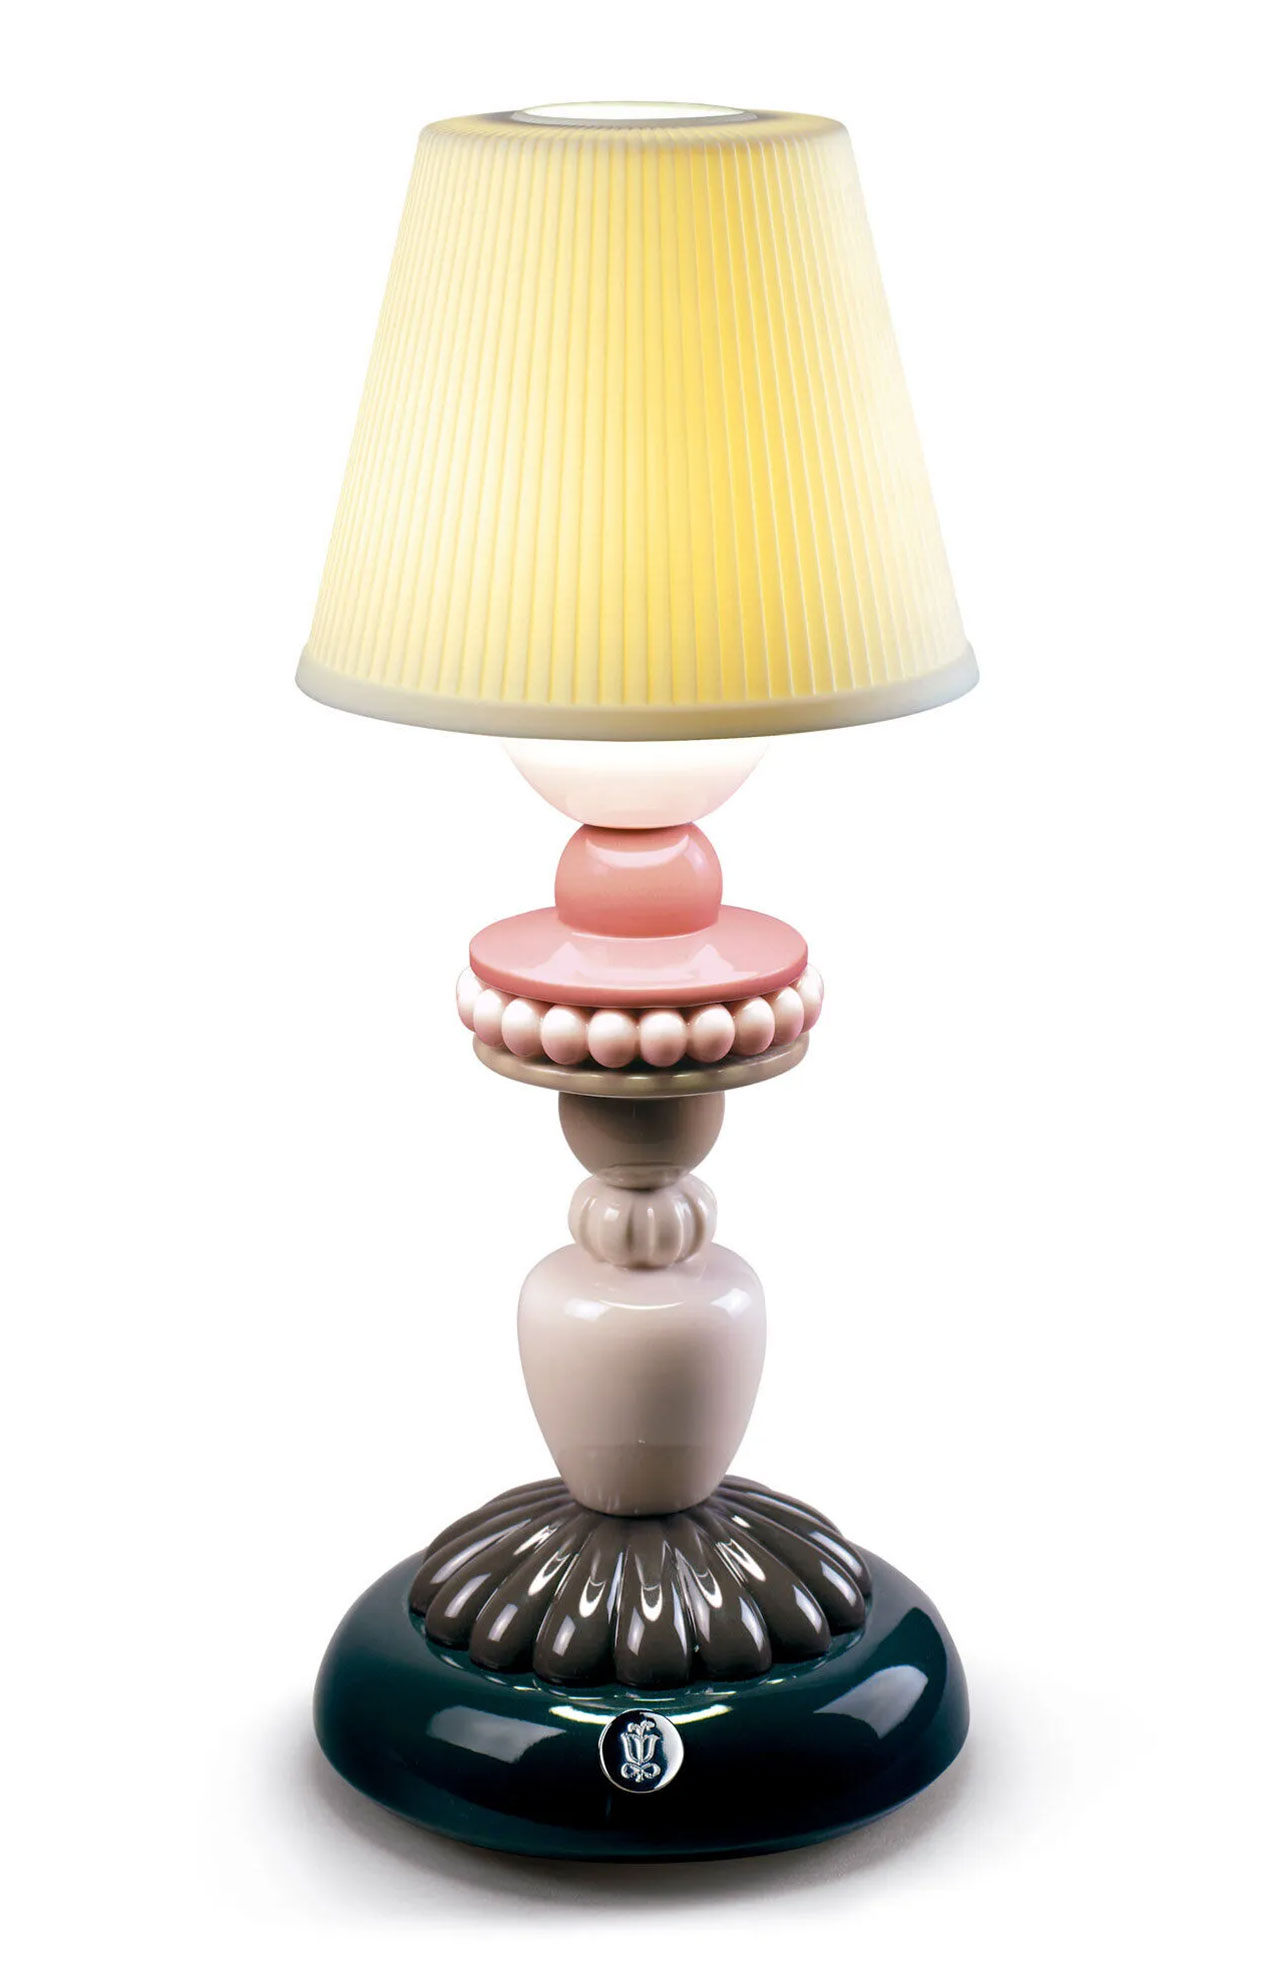 Iladro Sunflower Table Lamp from Neiman Marcus